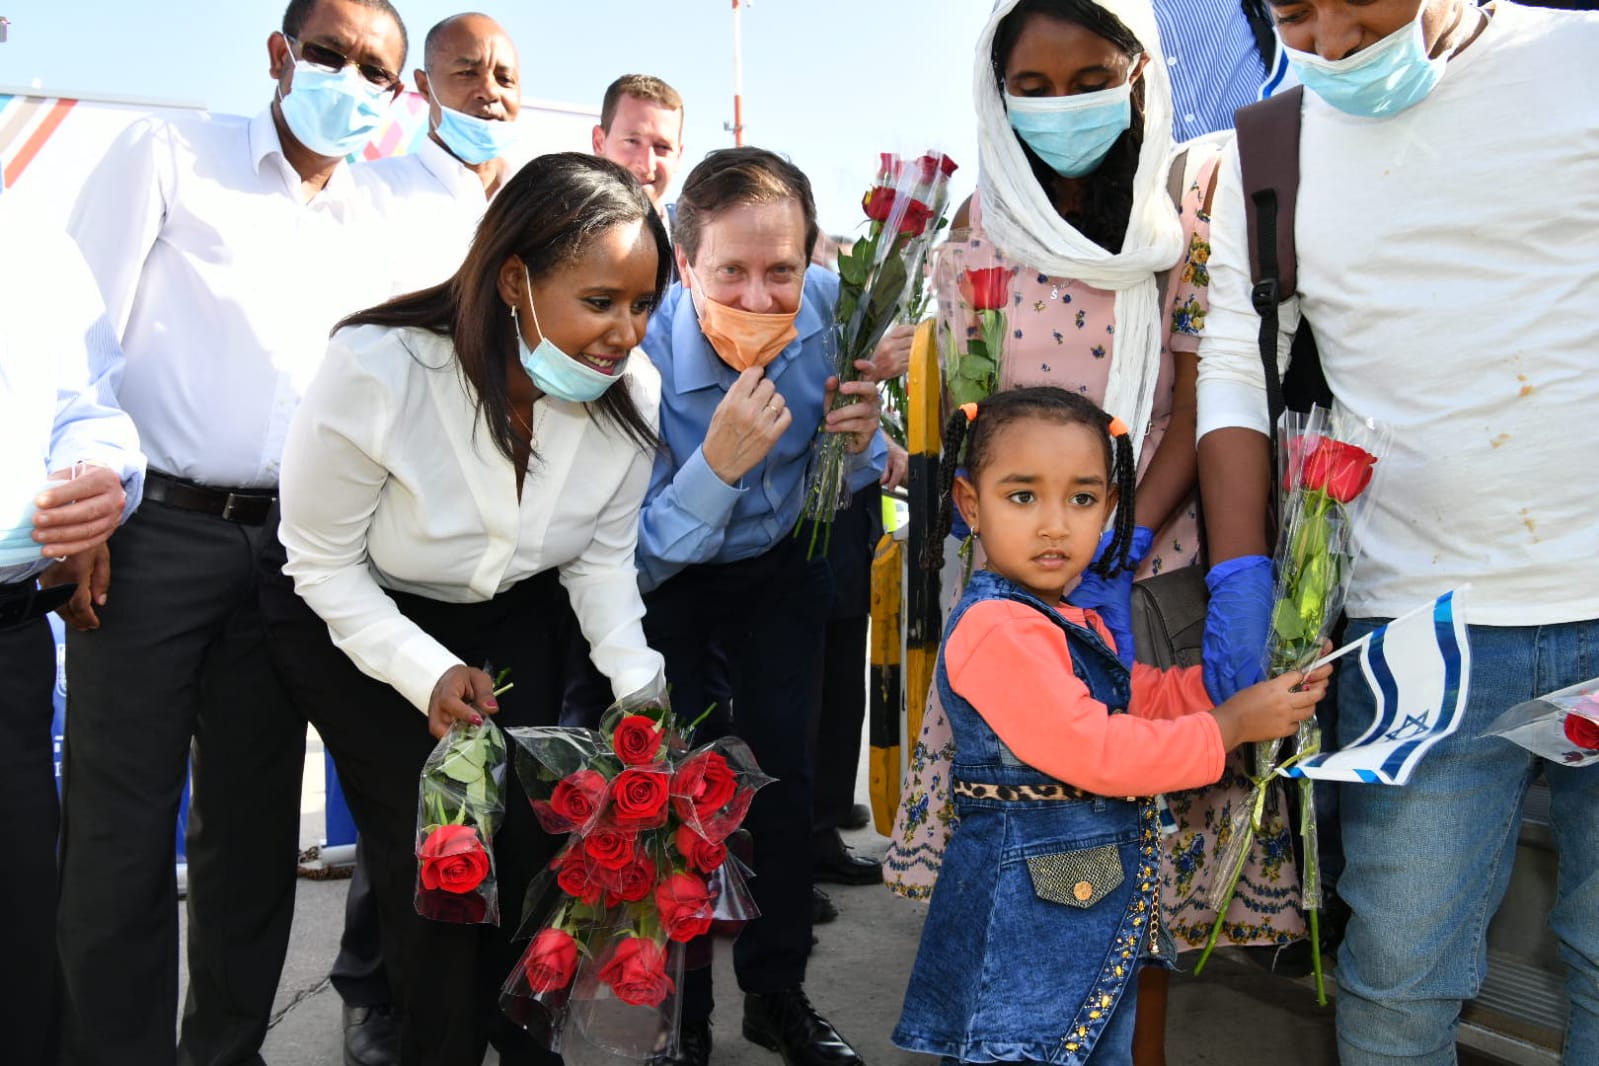 Isaac Herzog and Minister of Aliyah and Integration Pnina Tamano-Shata welcome 119 Ethiopian immigrants to Israel